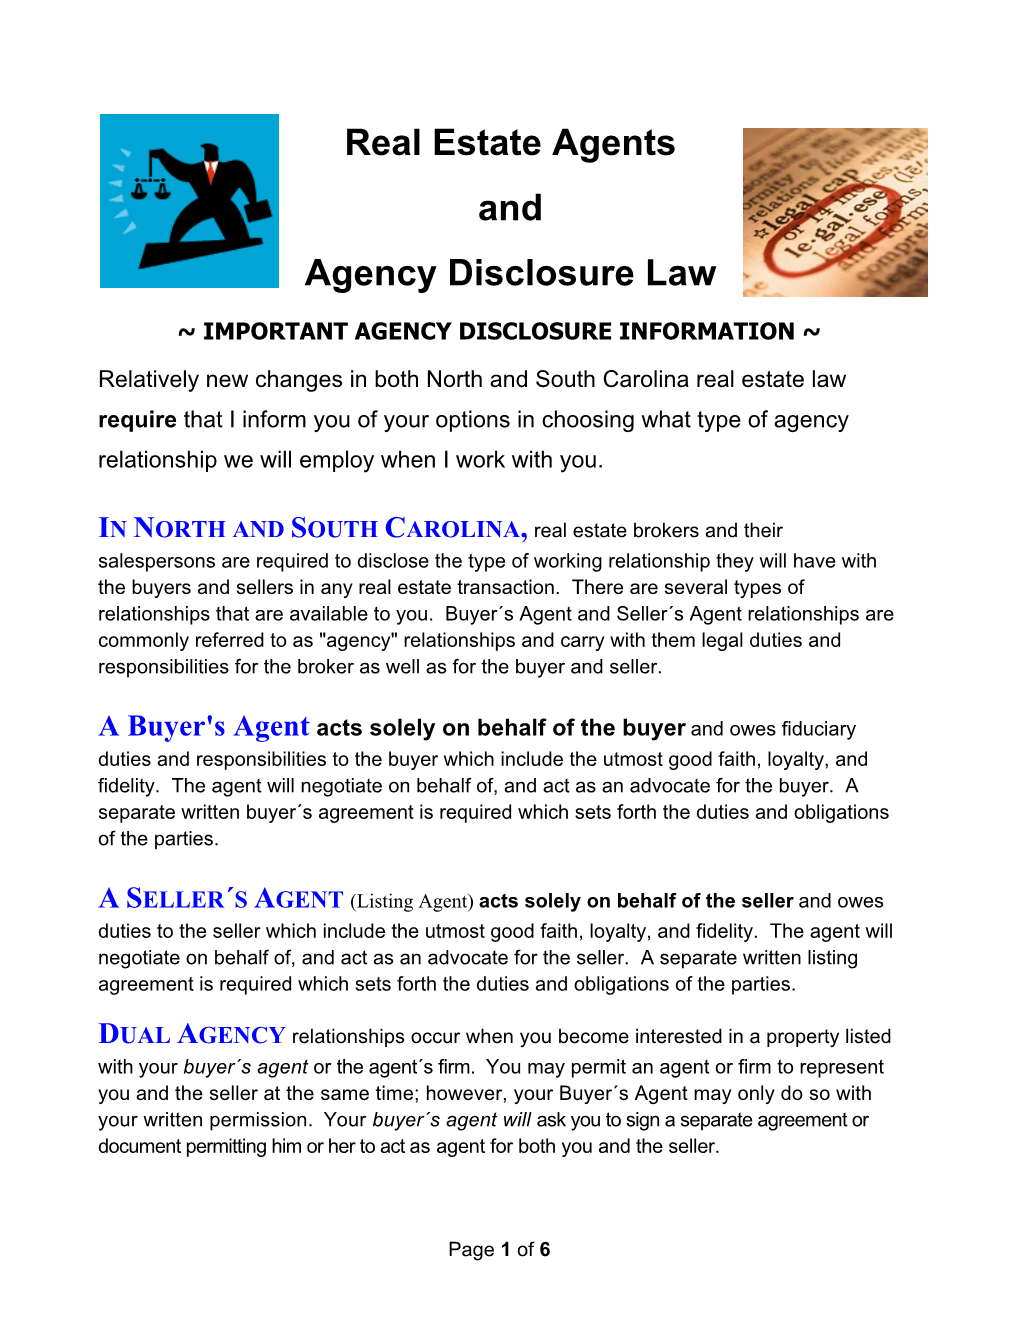 Real Estate Agents and Agency Disclosure Law